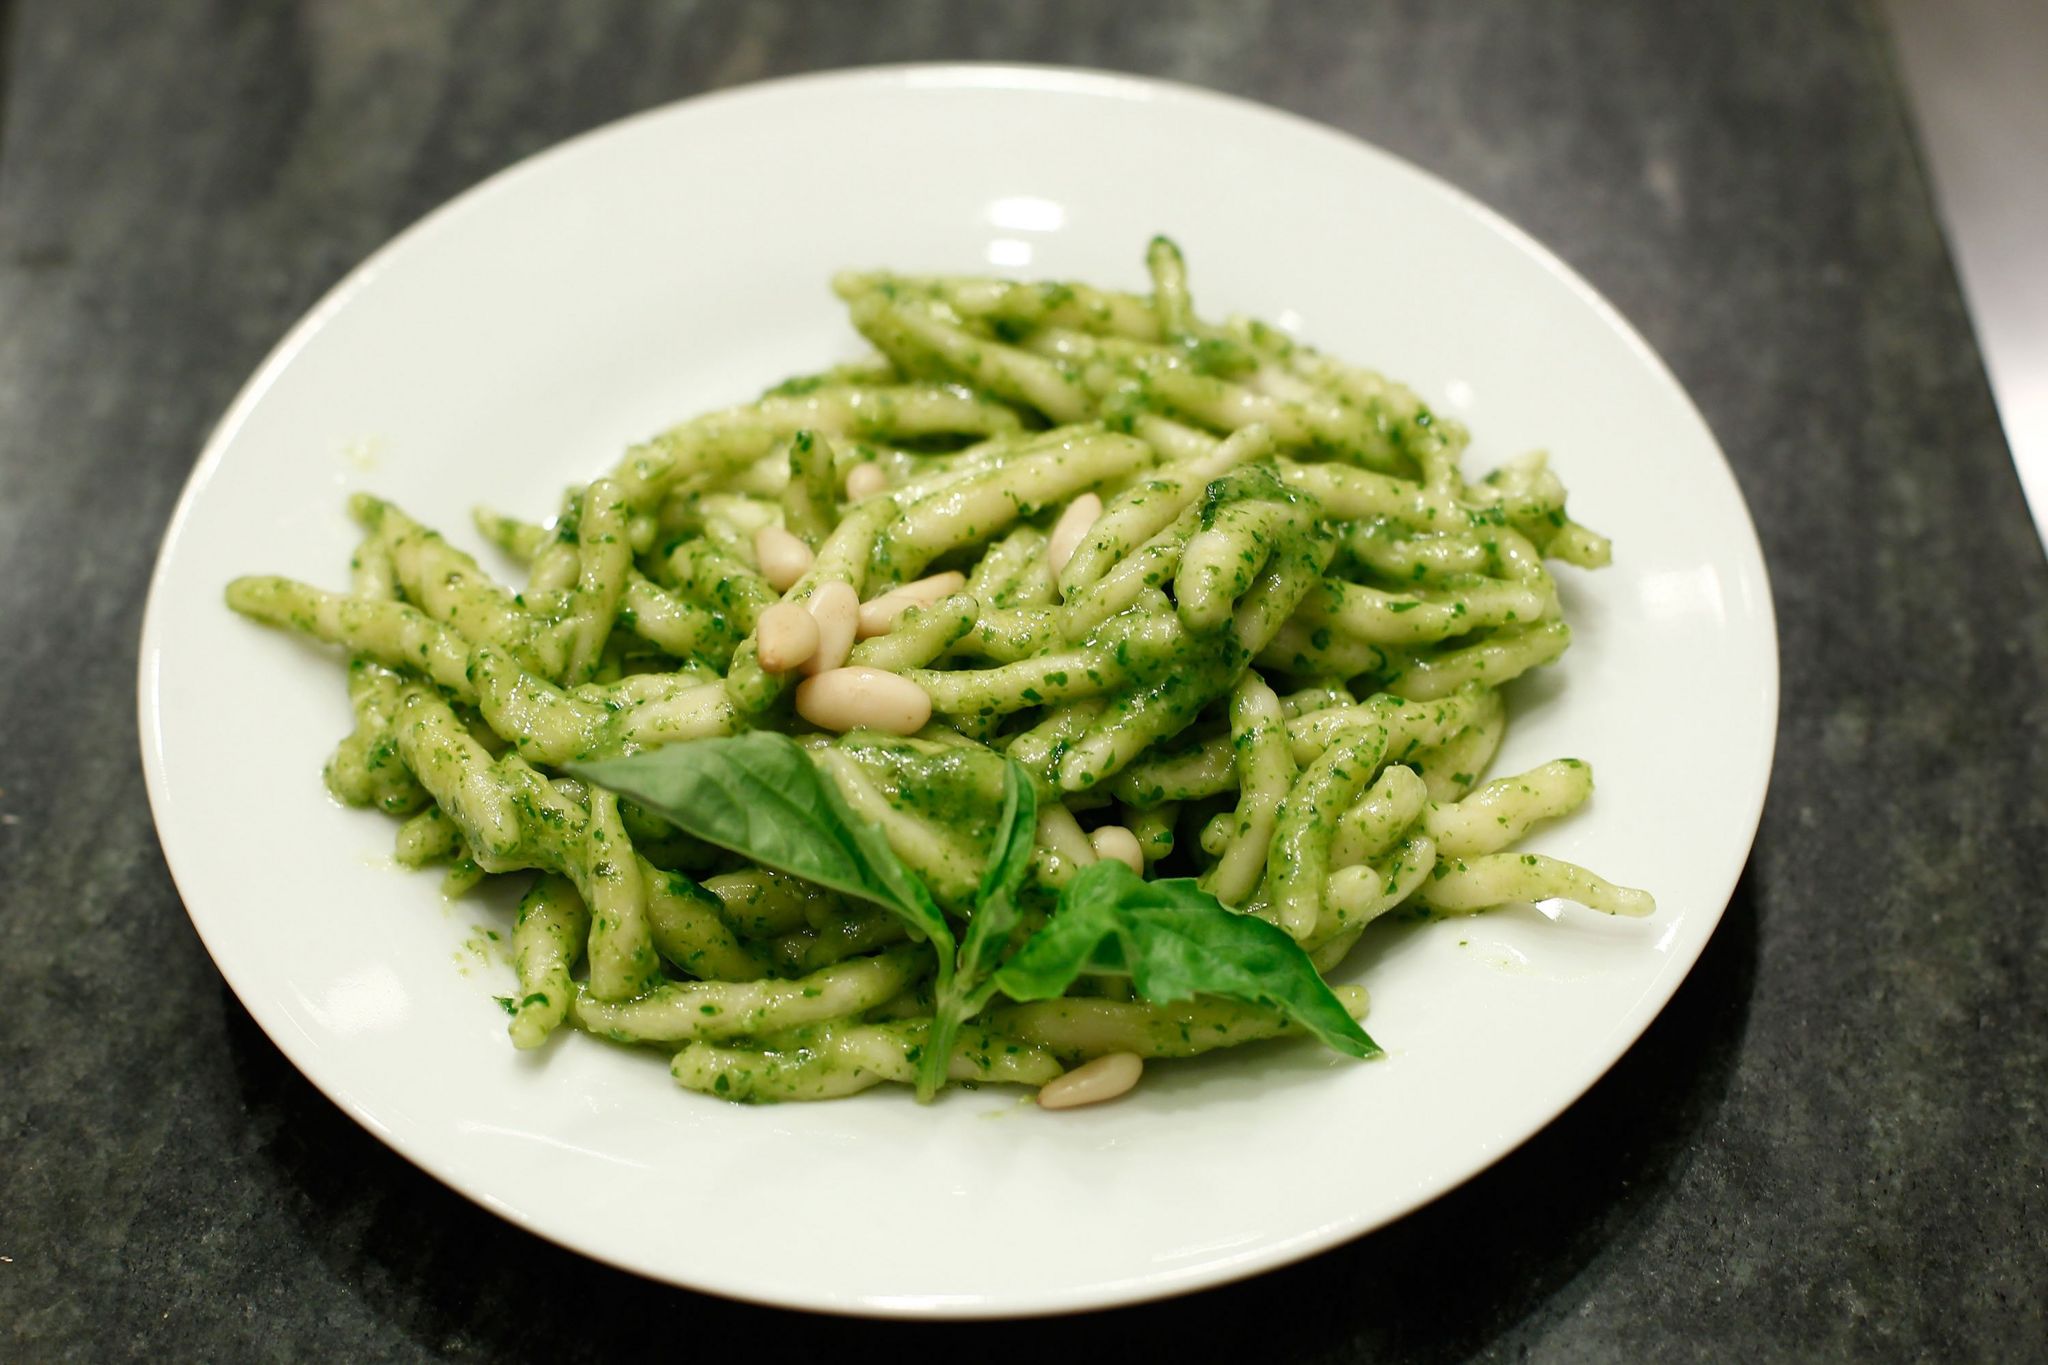 A plate of pasta with pesto